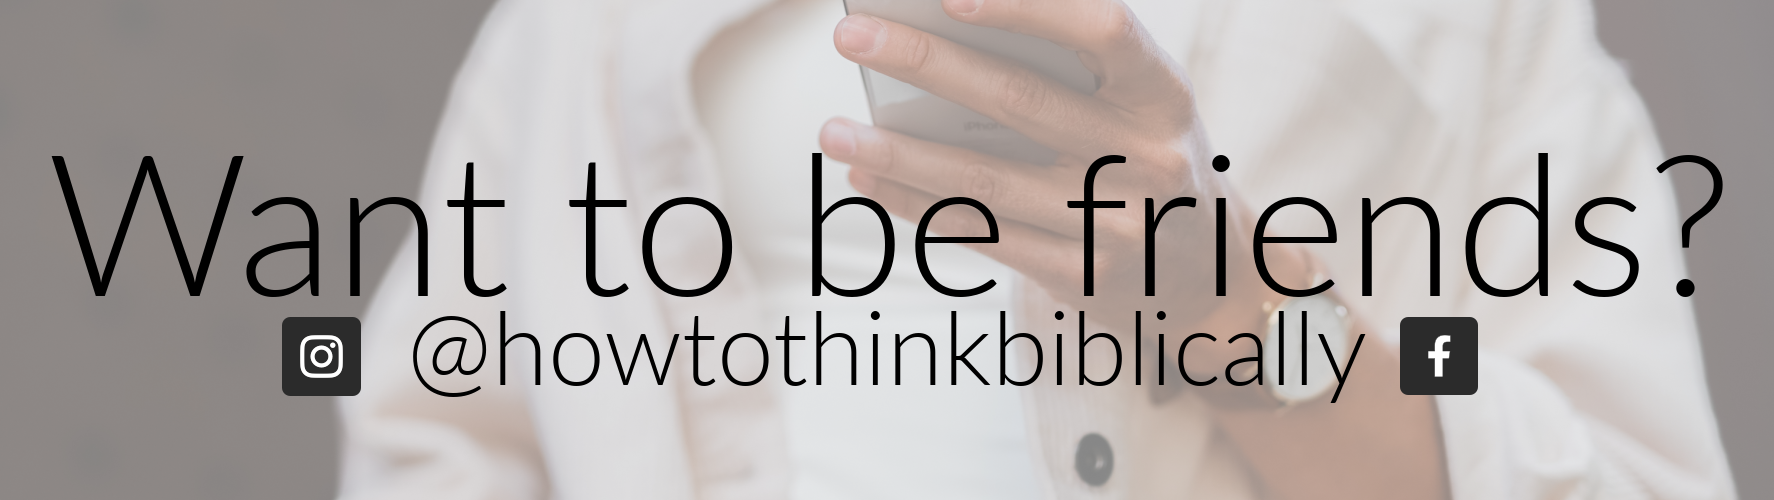 Want to be friends? @howtothinkbiblically on Facebook and Instagram